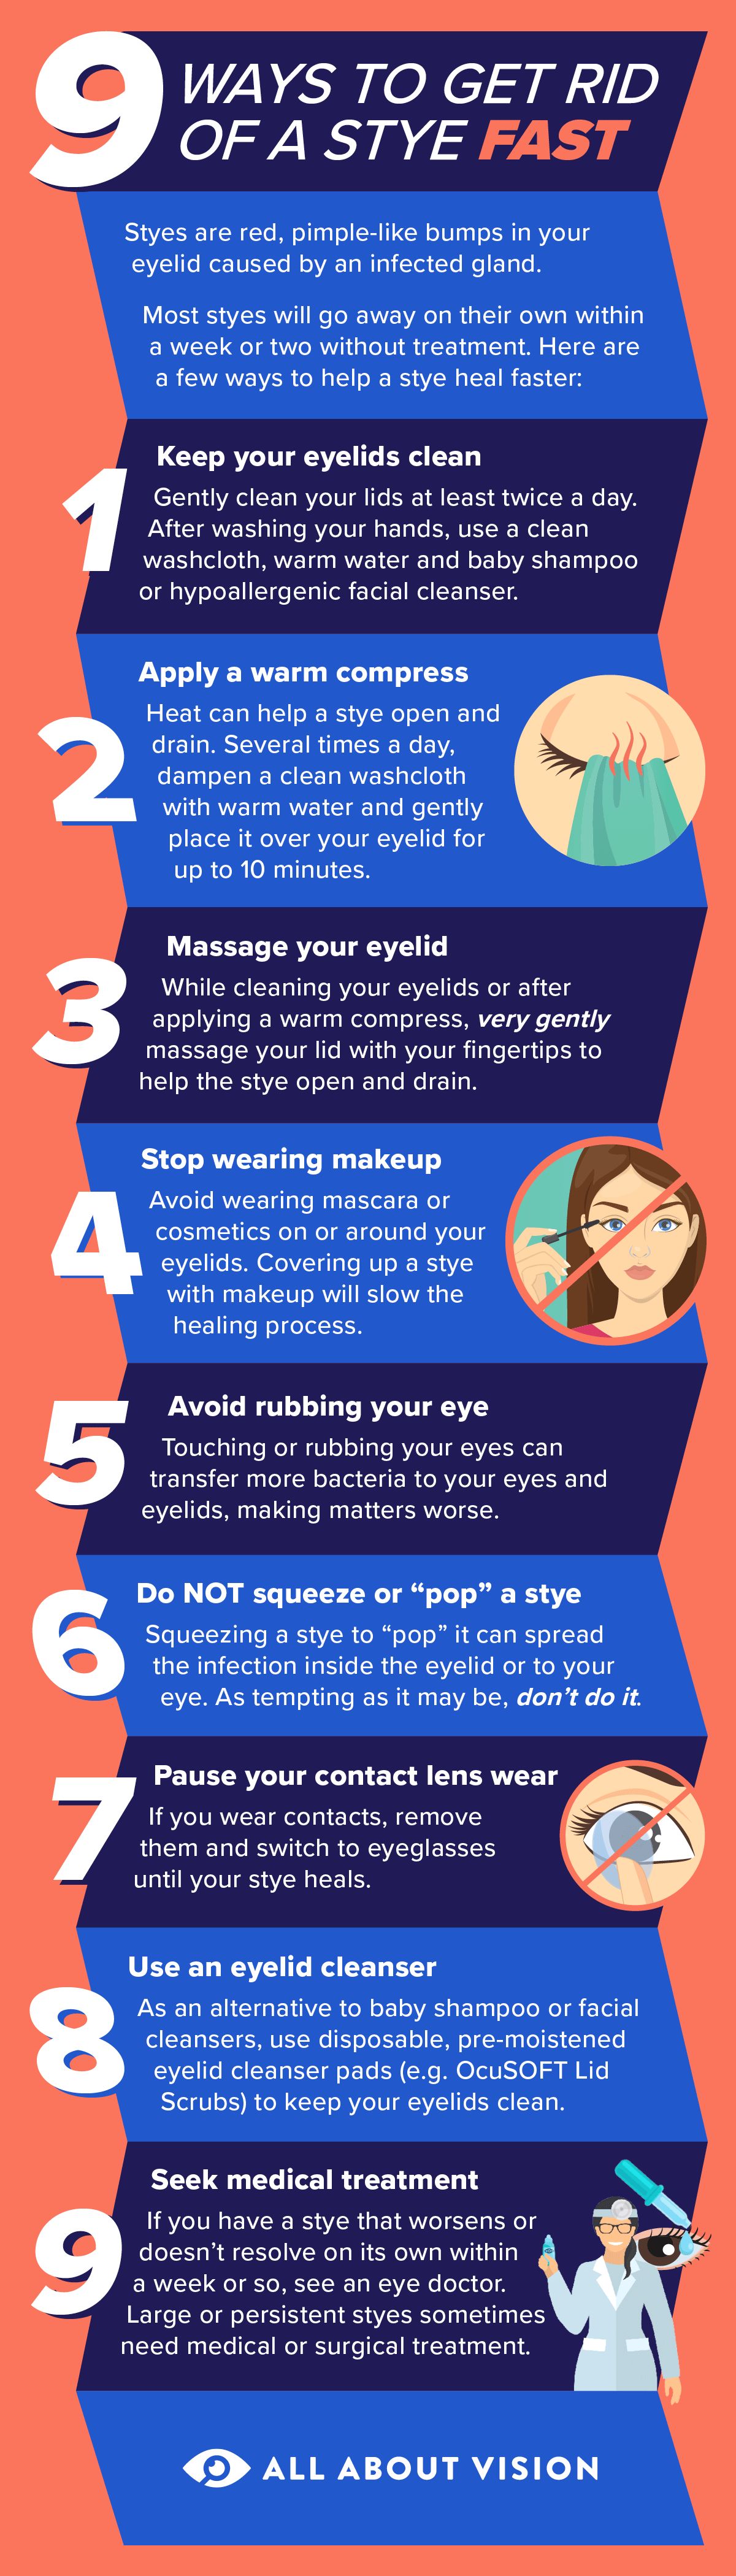 https://cdn.allaboutvision.com/AAV_Infographic_9_ways_to_get_rid_of_a_stye_fast.gif